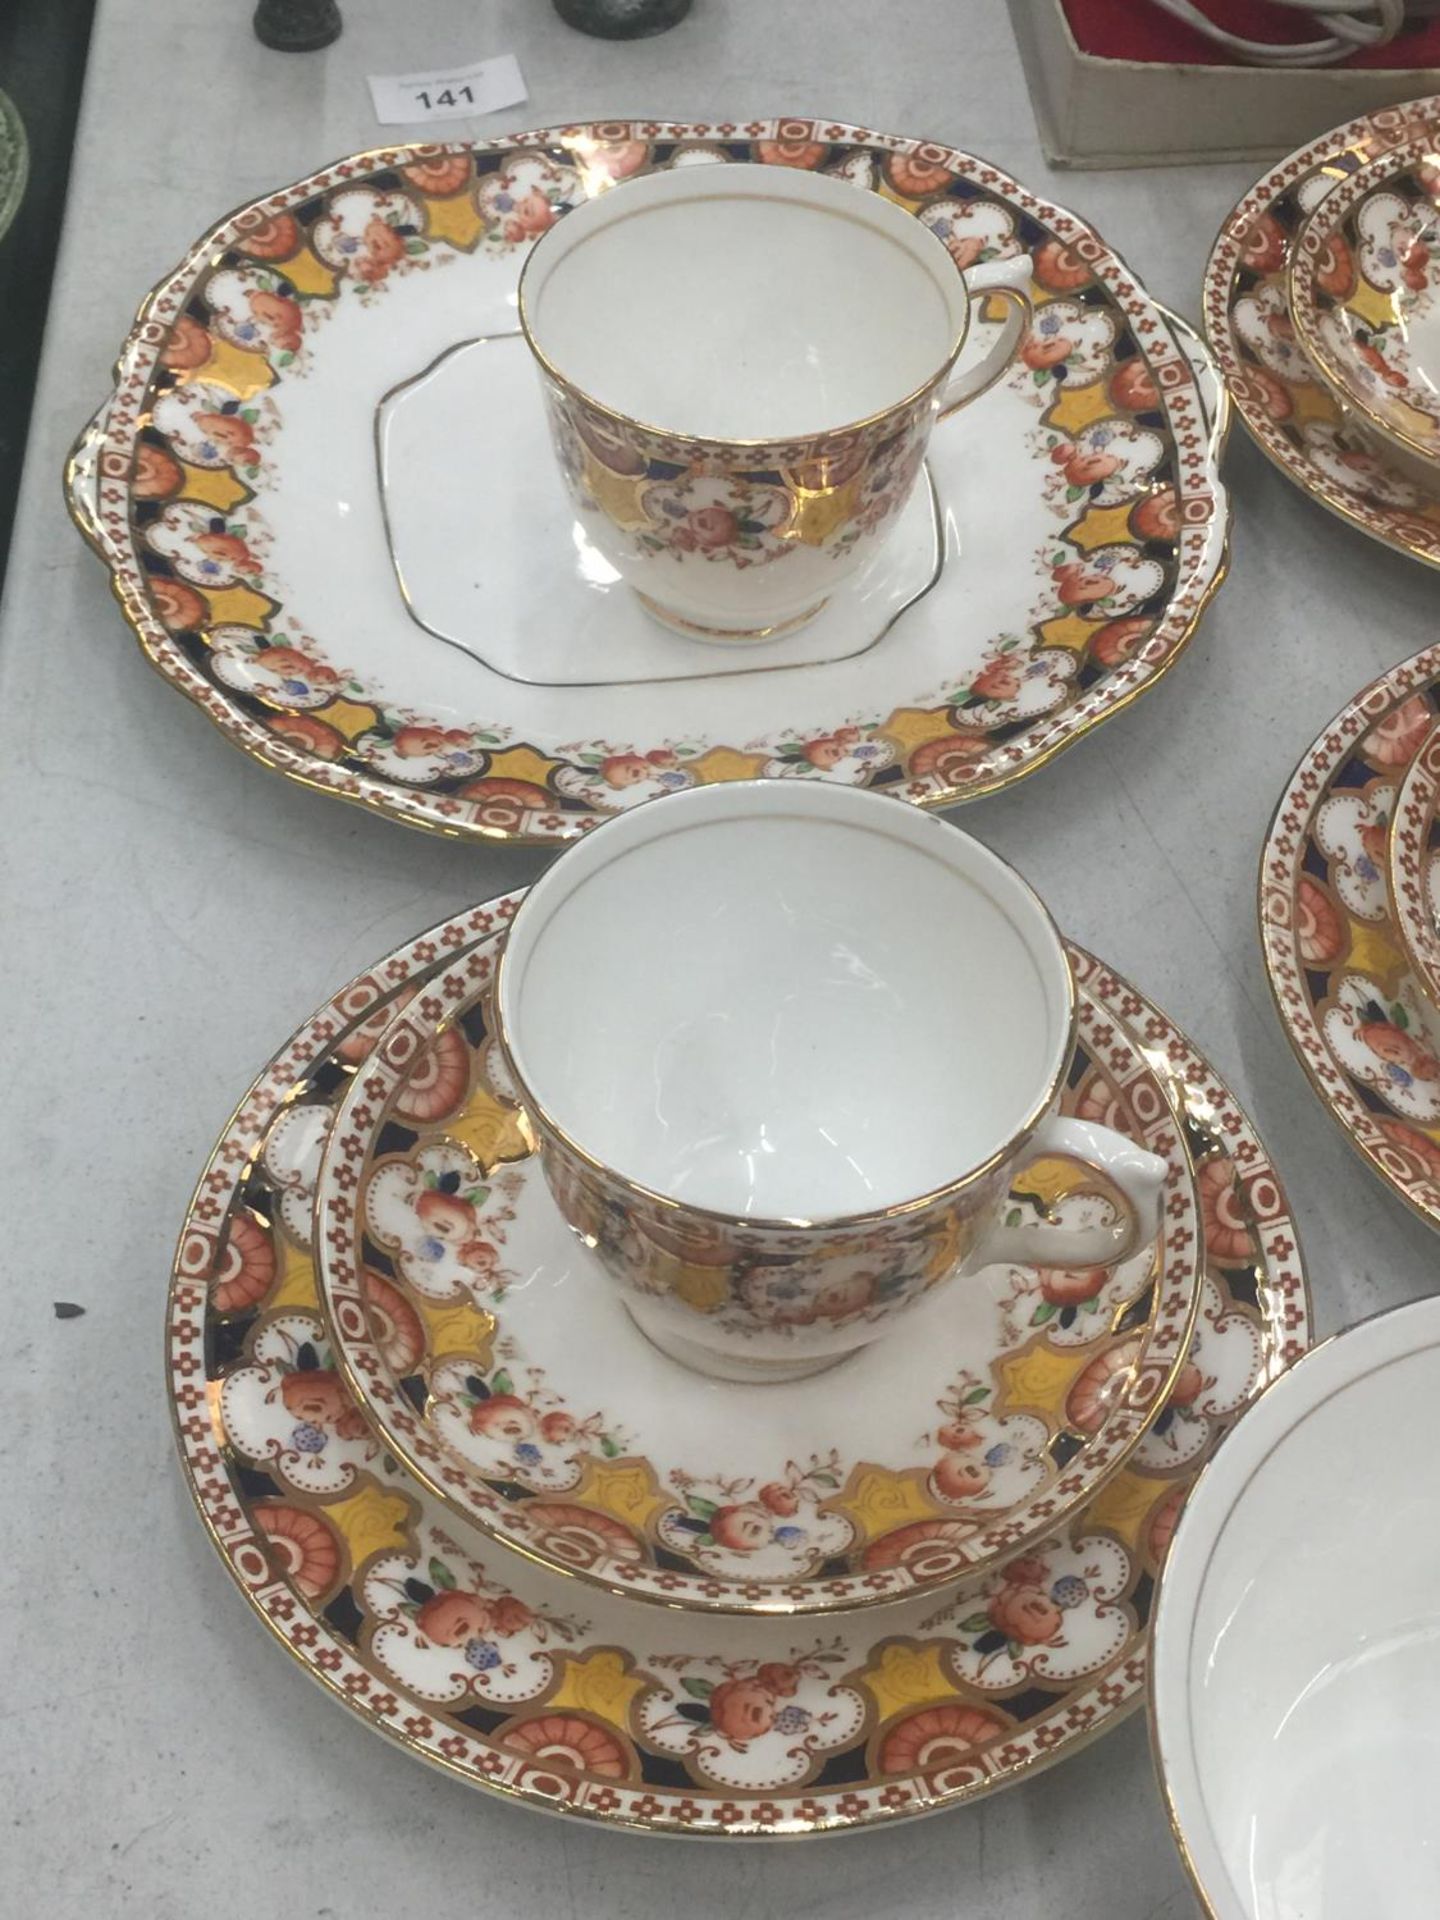 A QUANTITY OF SALISBURY CHINA 'TYNE' TO INCLUDE CAKE PLATE, CUPS, SAUCERS, SIDE PLATES AND A SUGAR - Image 4 of 6